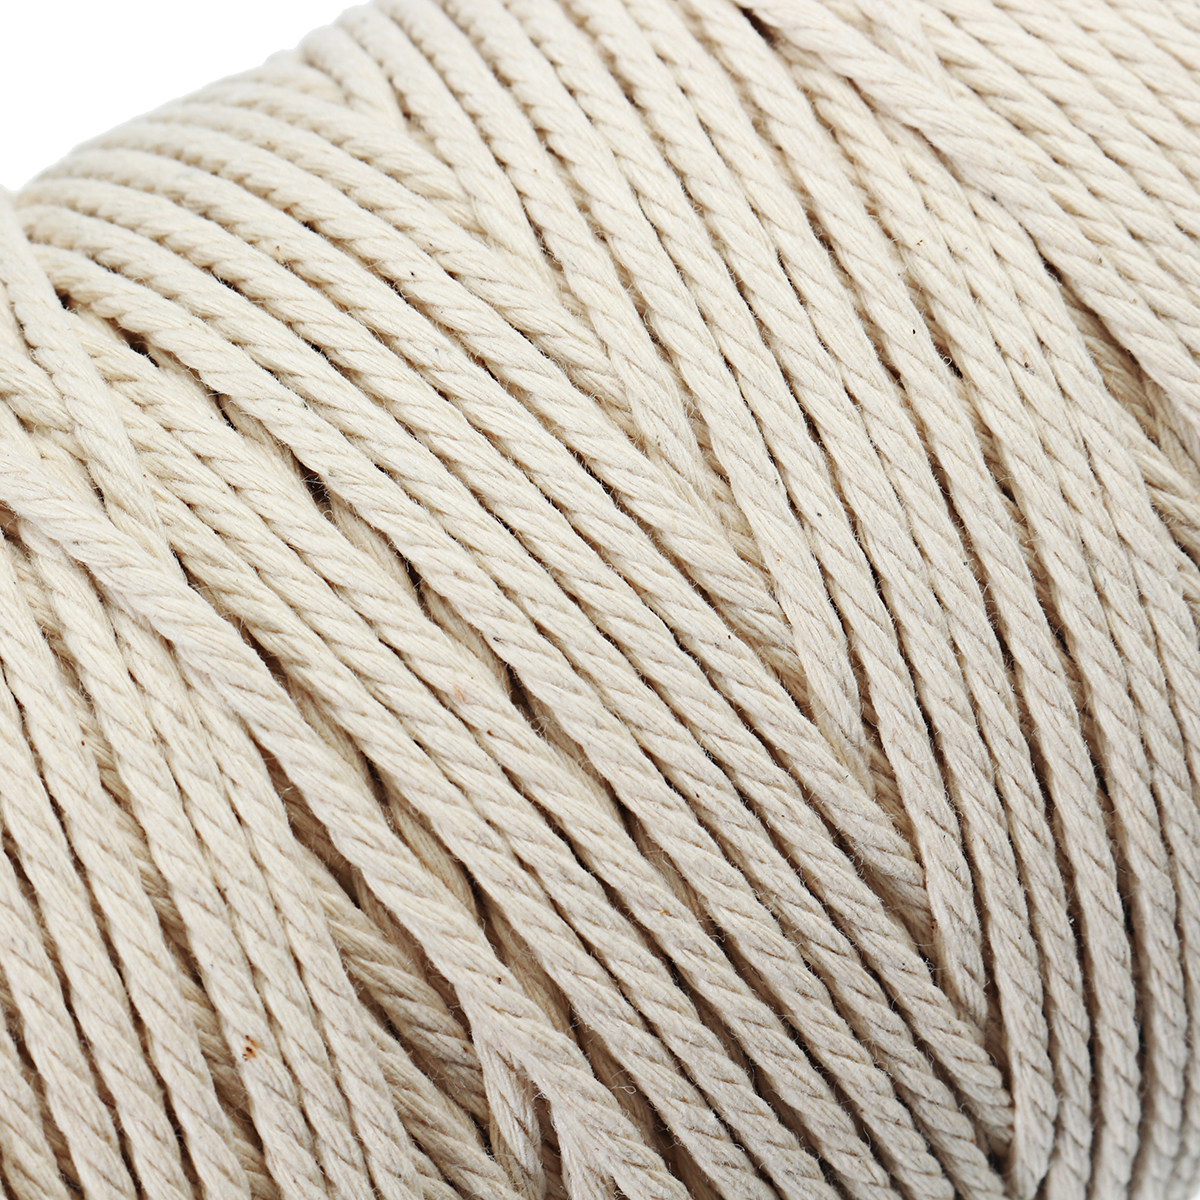 5Pcs-200Mx3mm-Natural-Beige-Cotton-Twisted-Cord-Rope-Braided-Wire-DIY-Craft-Macrame-String-1396554-7